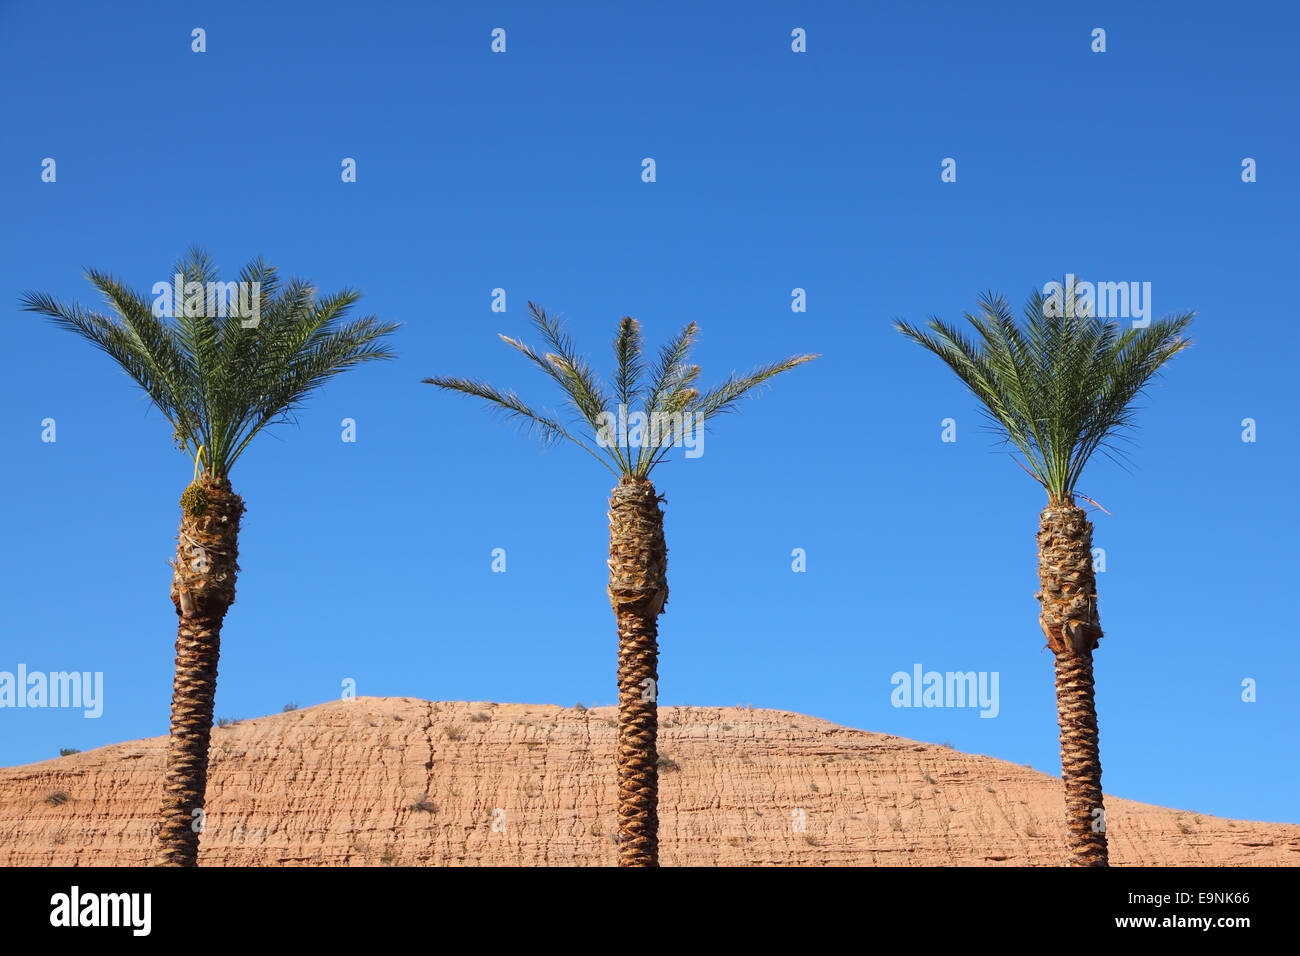 Three tall palm trees in the red desert Stock Photo